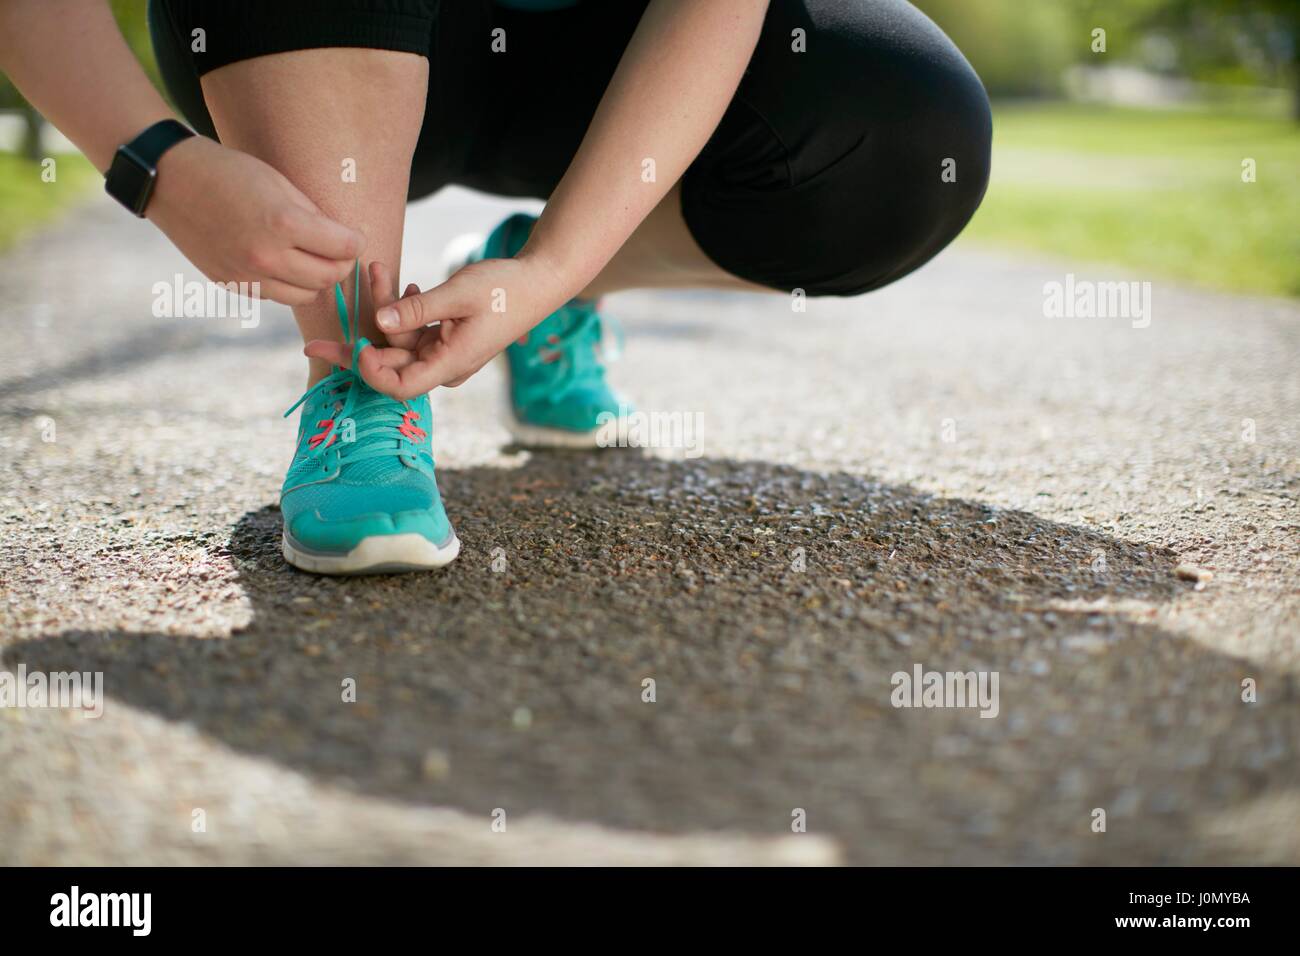 Woman crouching, tying up trainers. Stock Photo